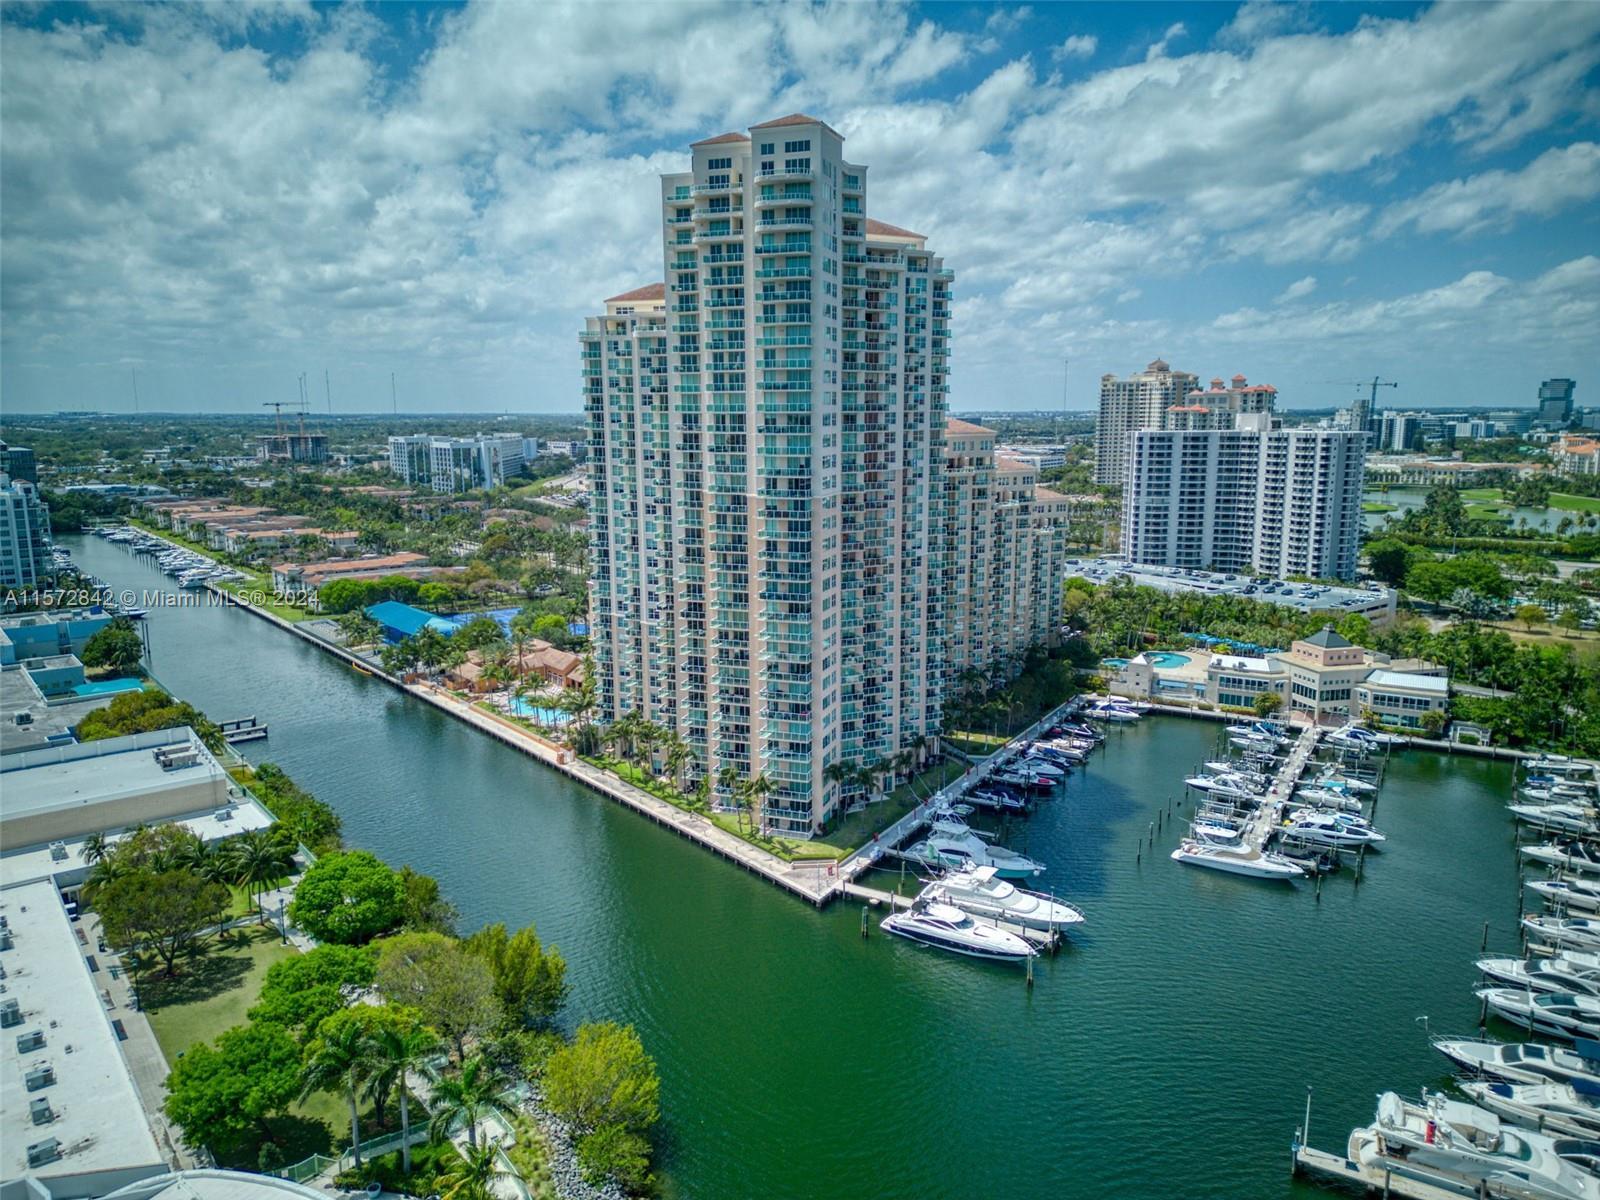 Welcome to this beautiful waterfront residence! It is located in the heart of Aventura, the City of 